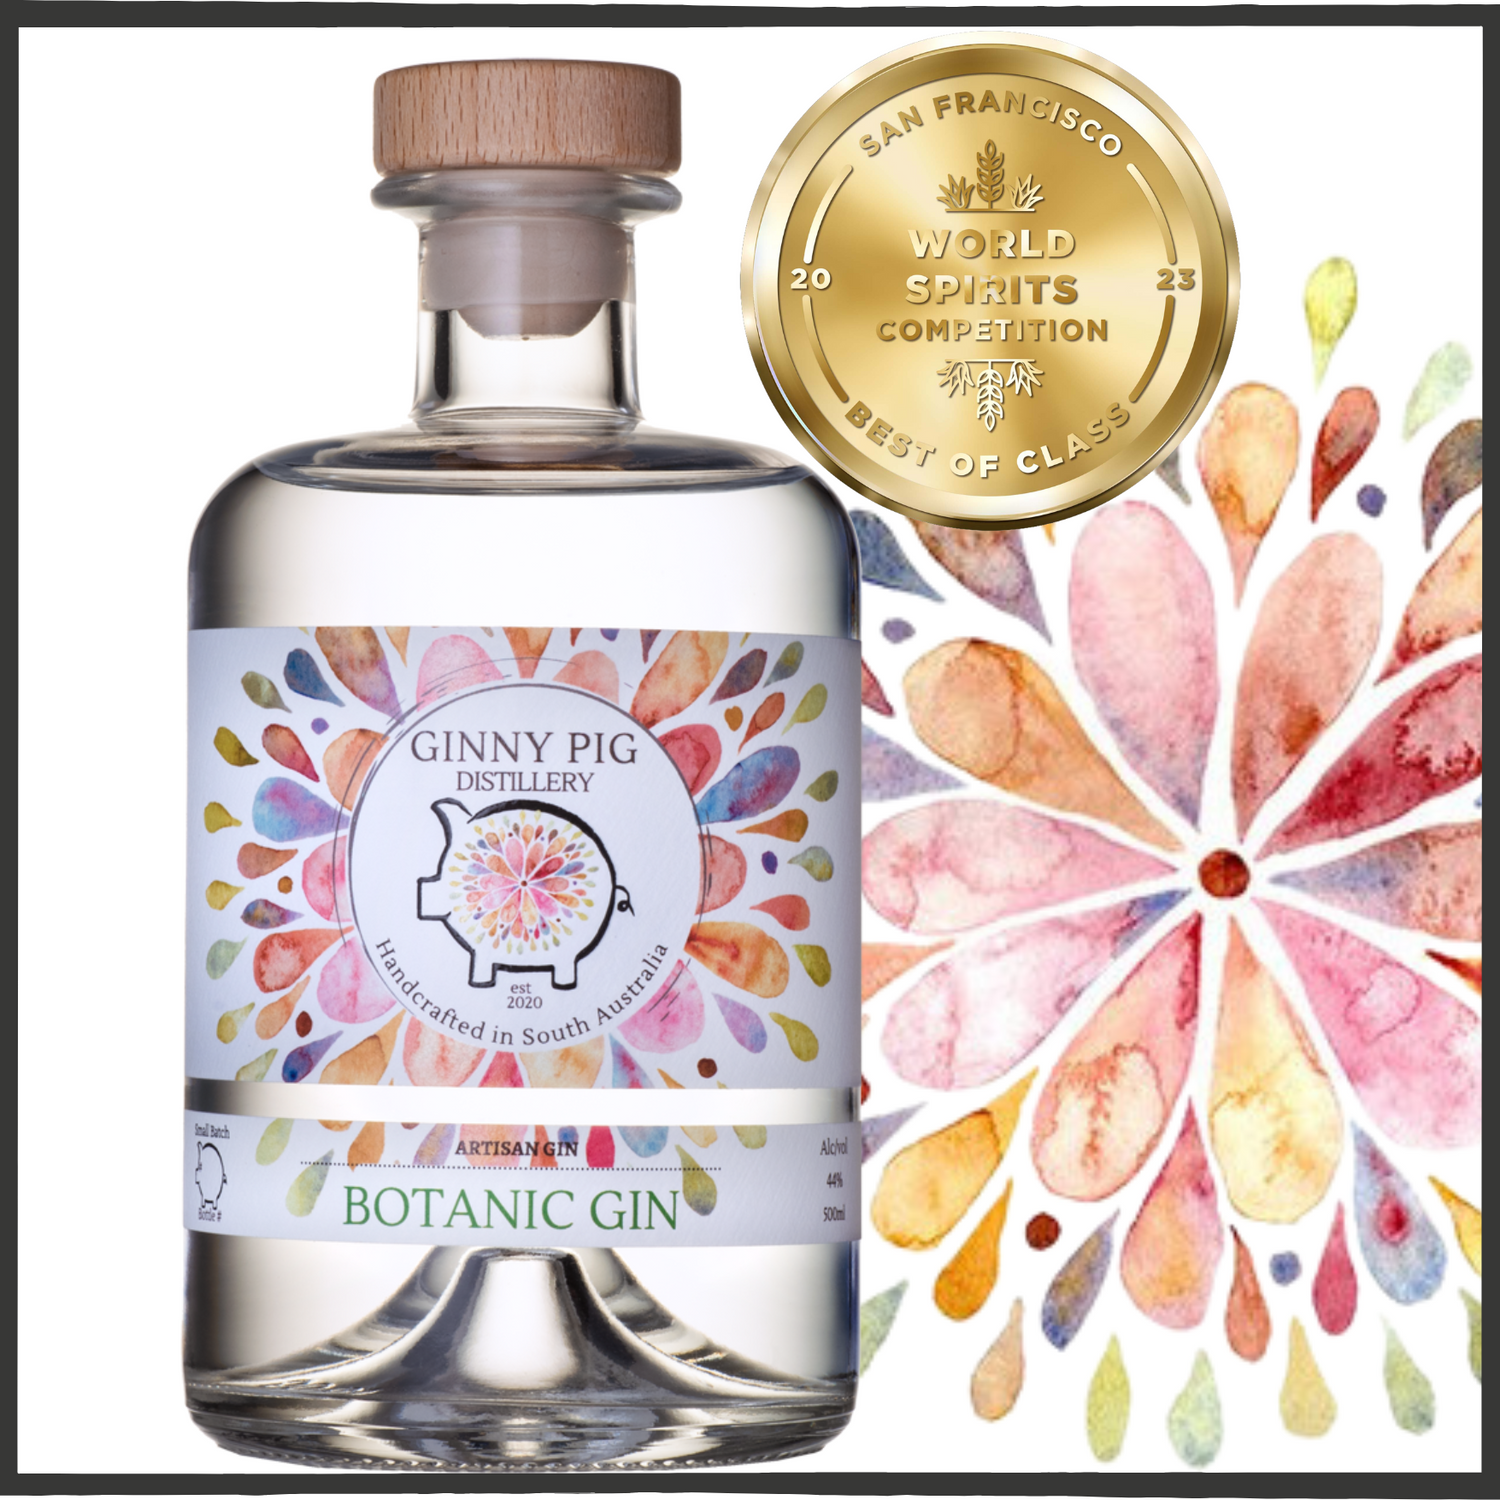 Image of Ginny Pig Botanic Gin with San Francisco Best in Class gold medal